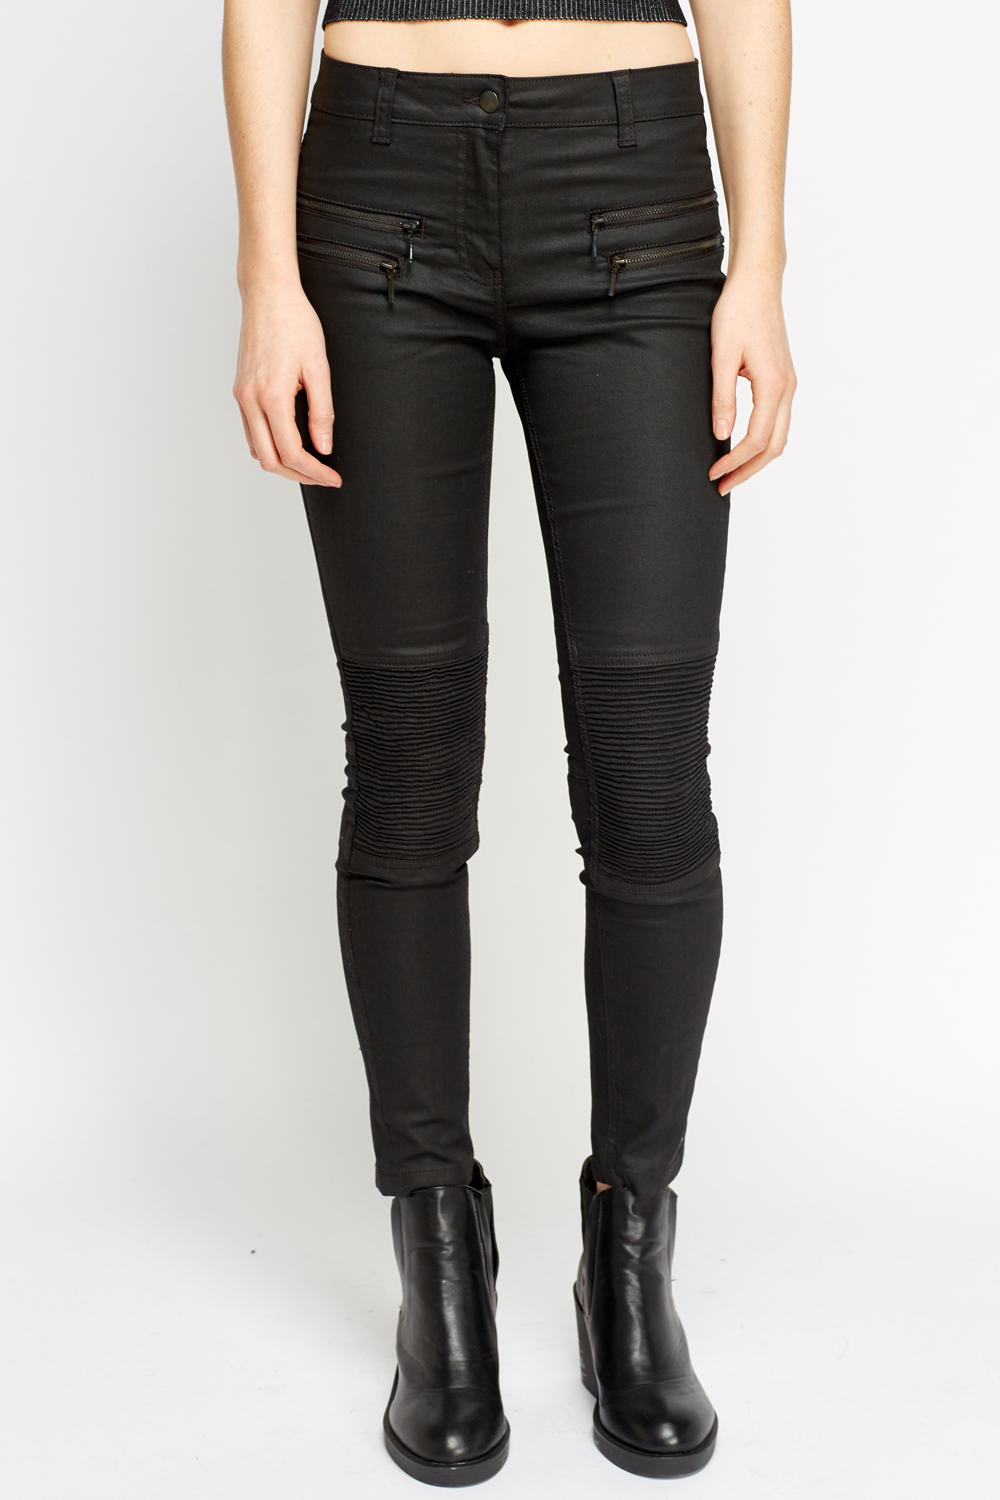 Black Waxed Textured Jeans - Just $6